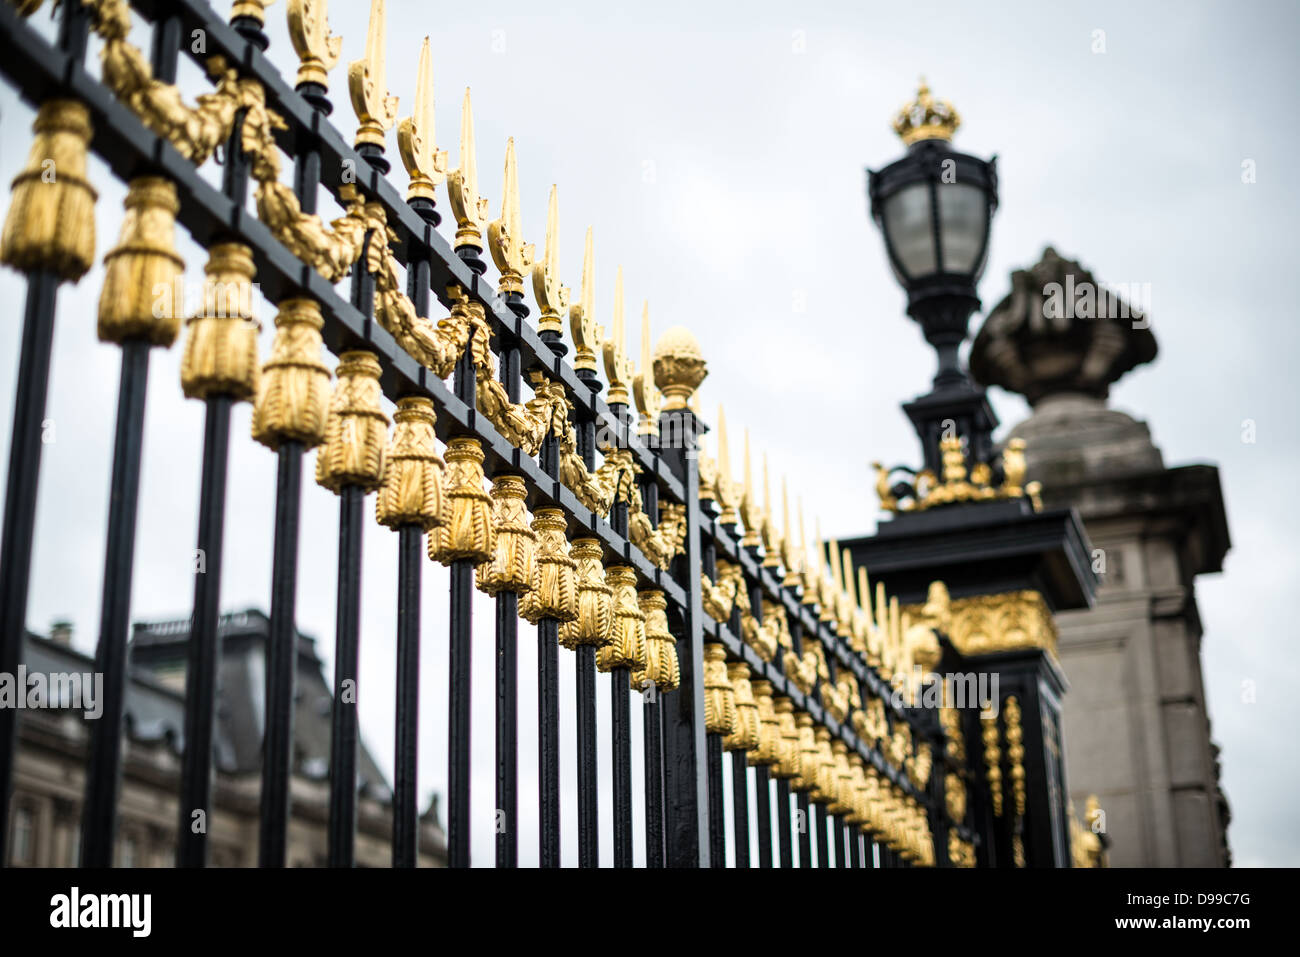 BRUSSELS, Belgium - Gold decorated gates in front of the Royal Palace of Brussels, the official palace of the Belgian royal family. Stock Photo